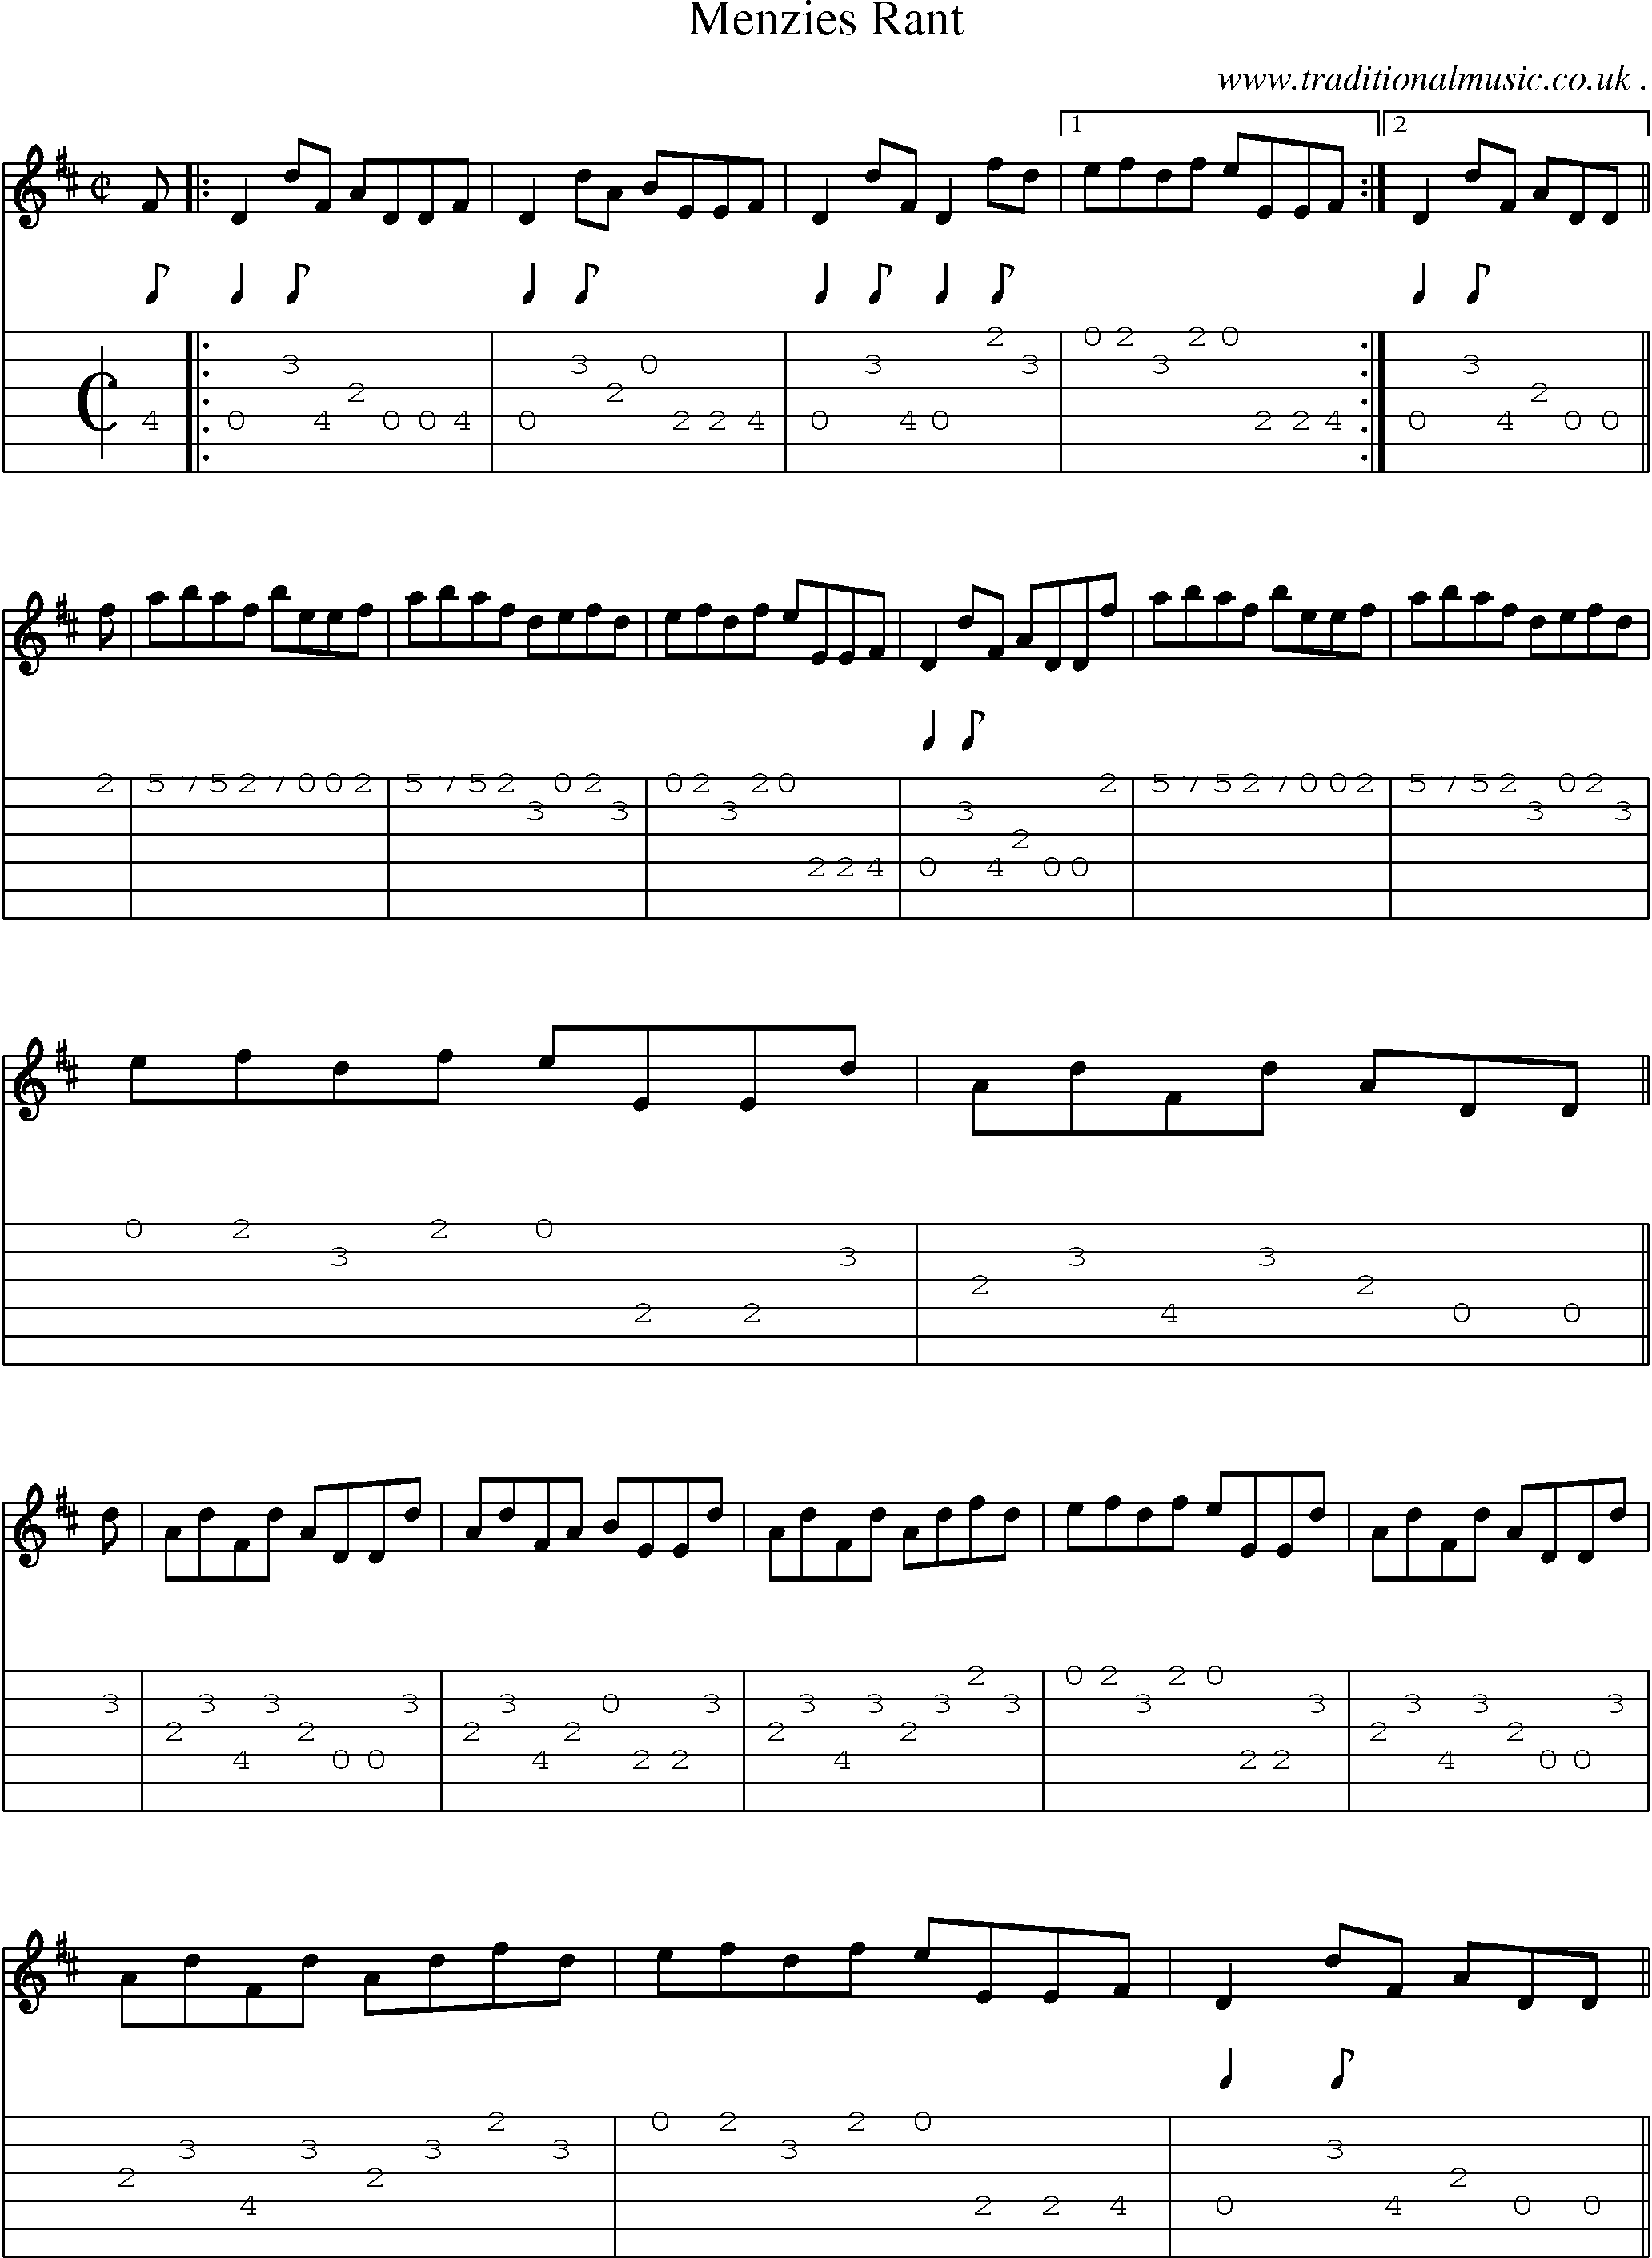 Sheet-music  score, Chords and Guitar Tabs for Menzies Rant